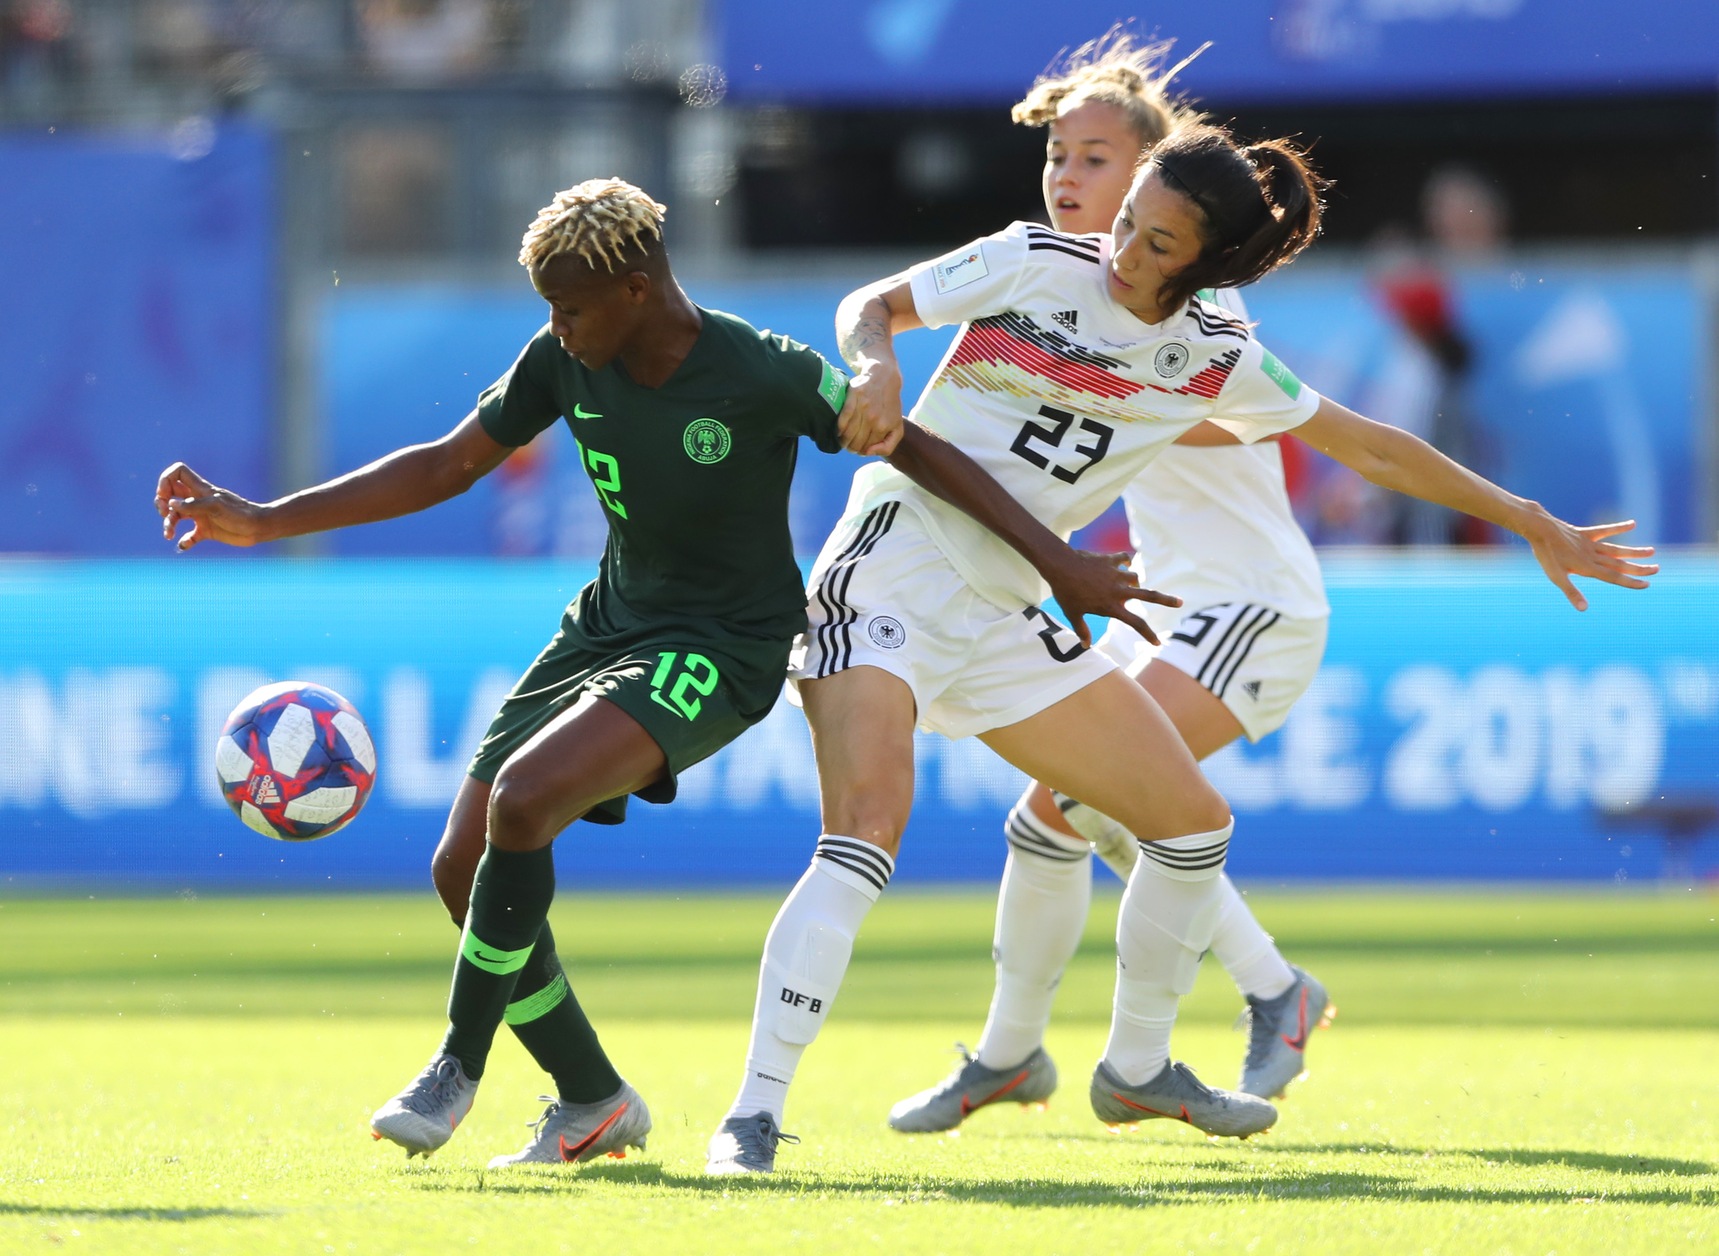 Uchenna Kanu, NAIA soccer player in the fall, Nigeria’s FIFA Women’s Cup player in the summer